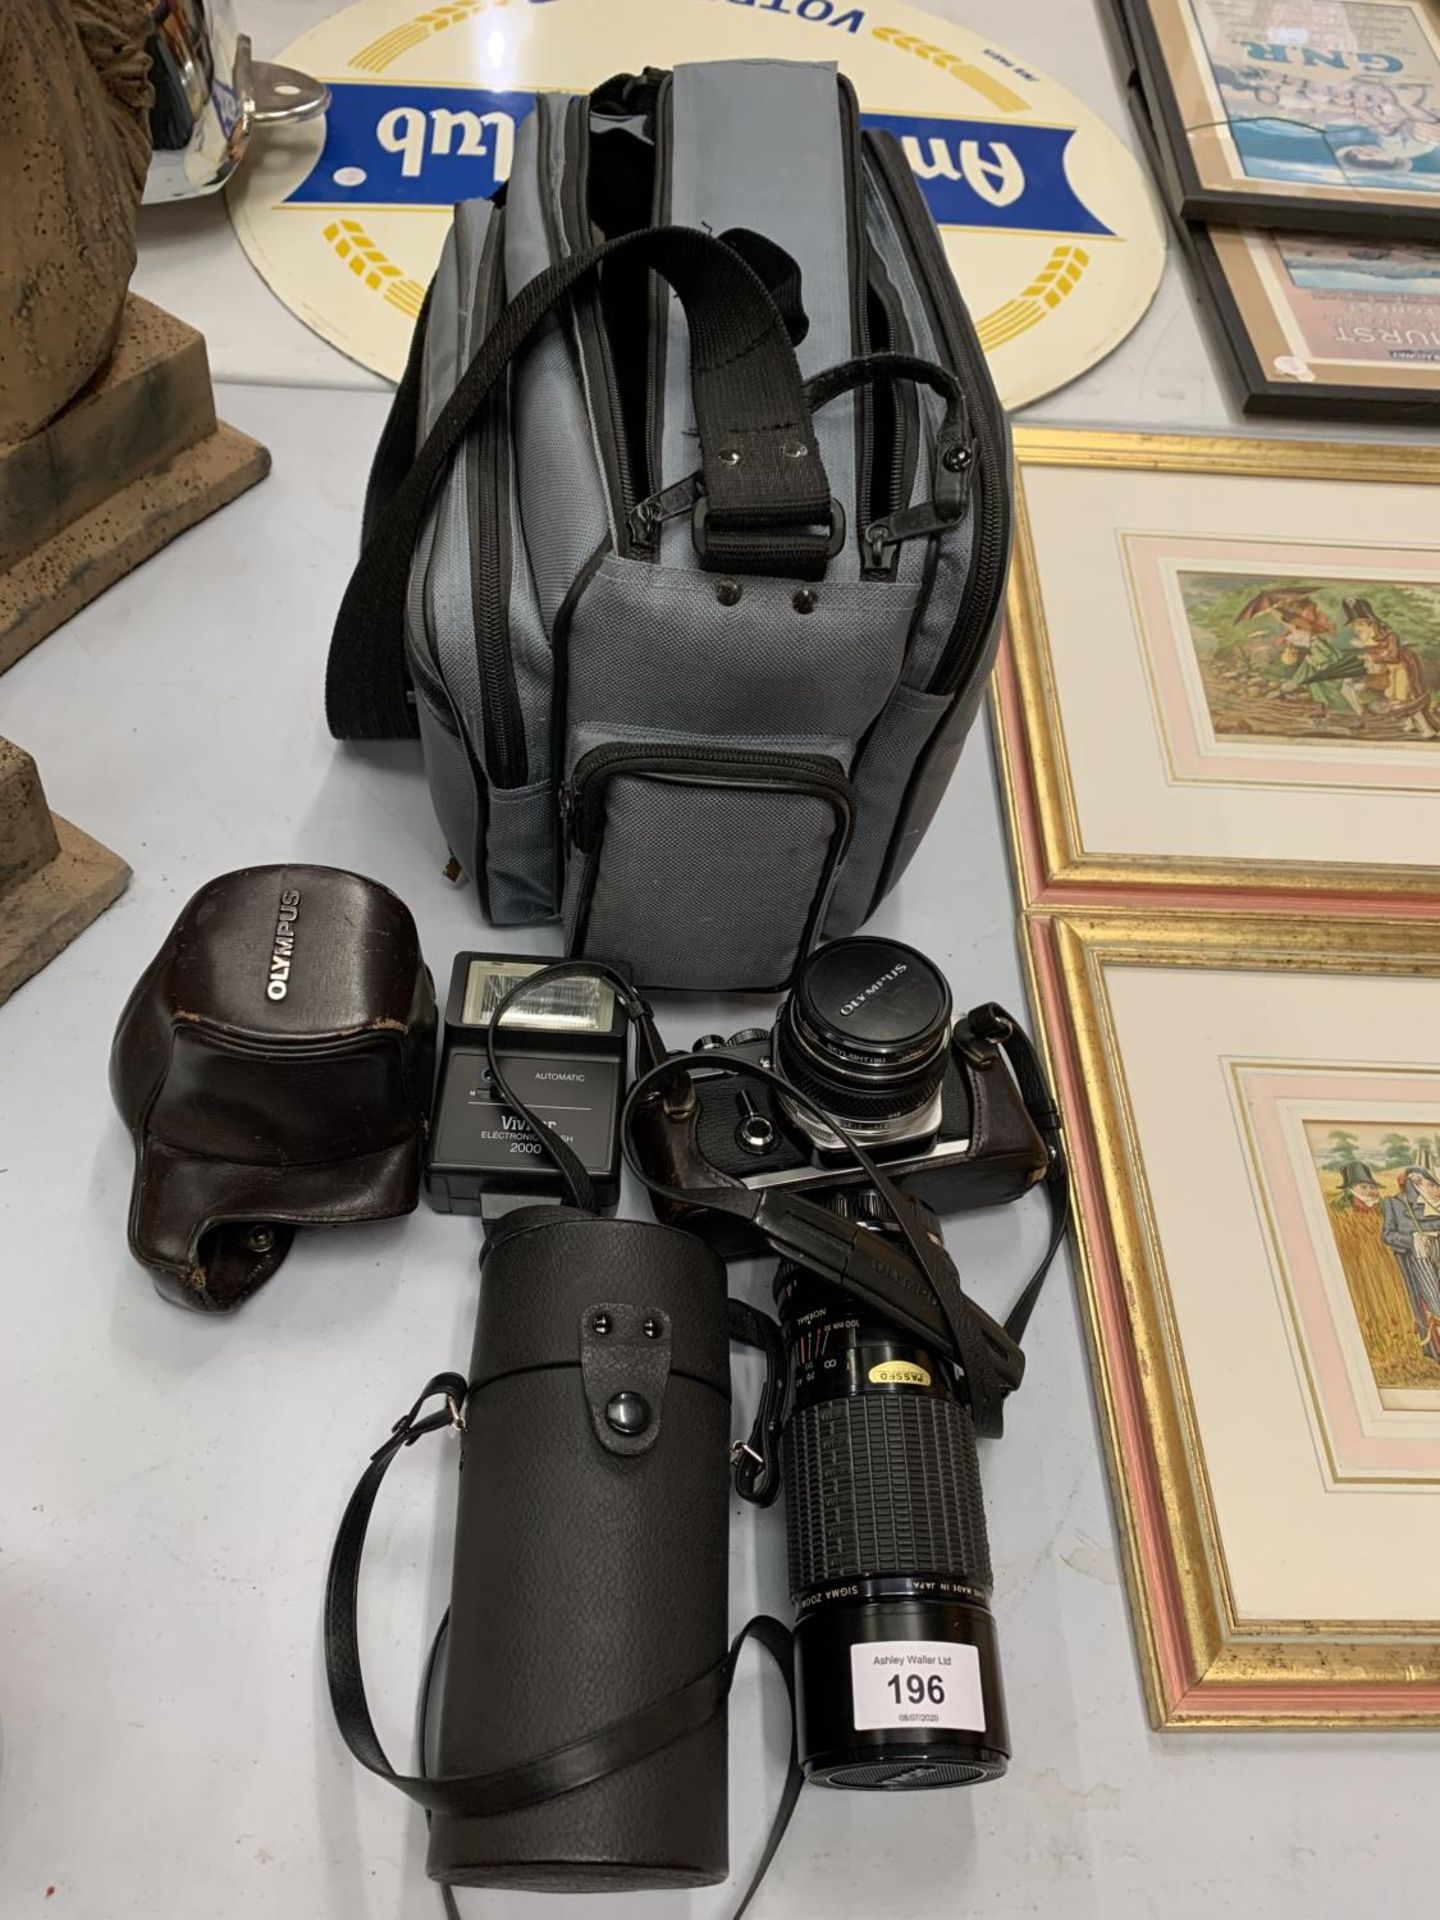 AN OLYMPUS CAMERA WITH FLASH, LENS AND BAG